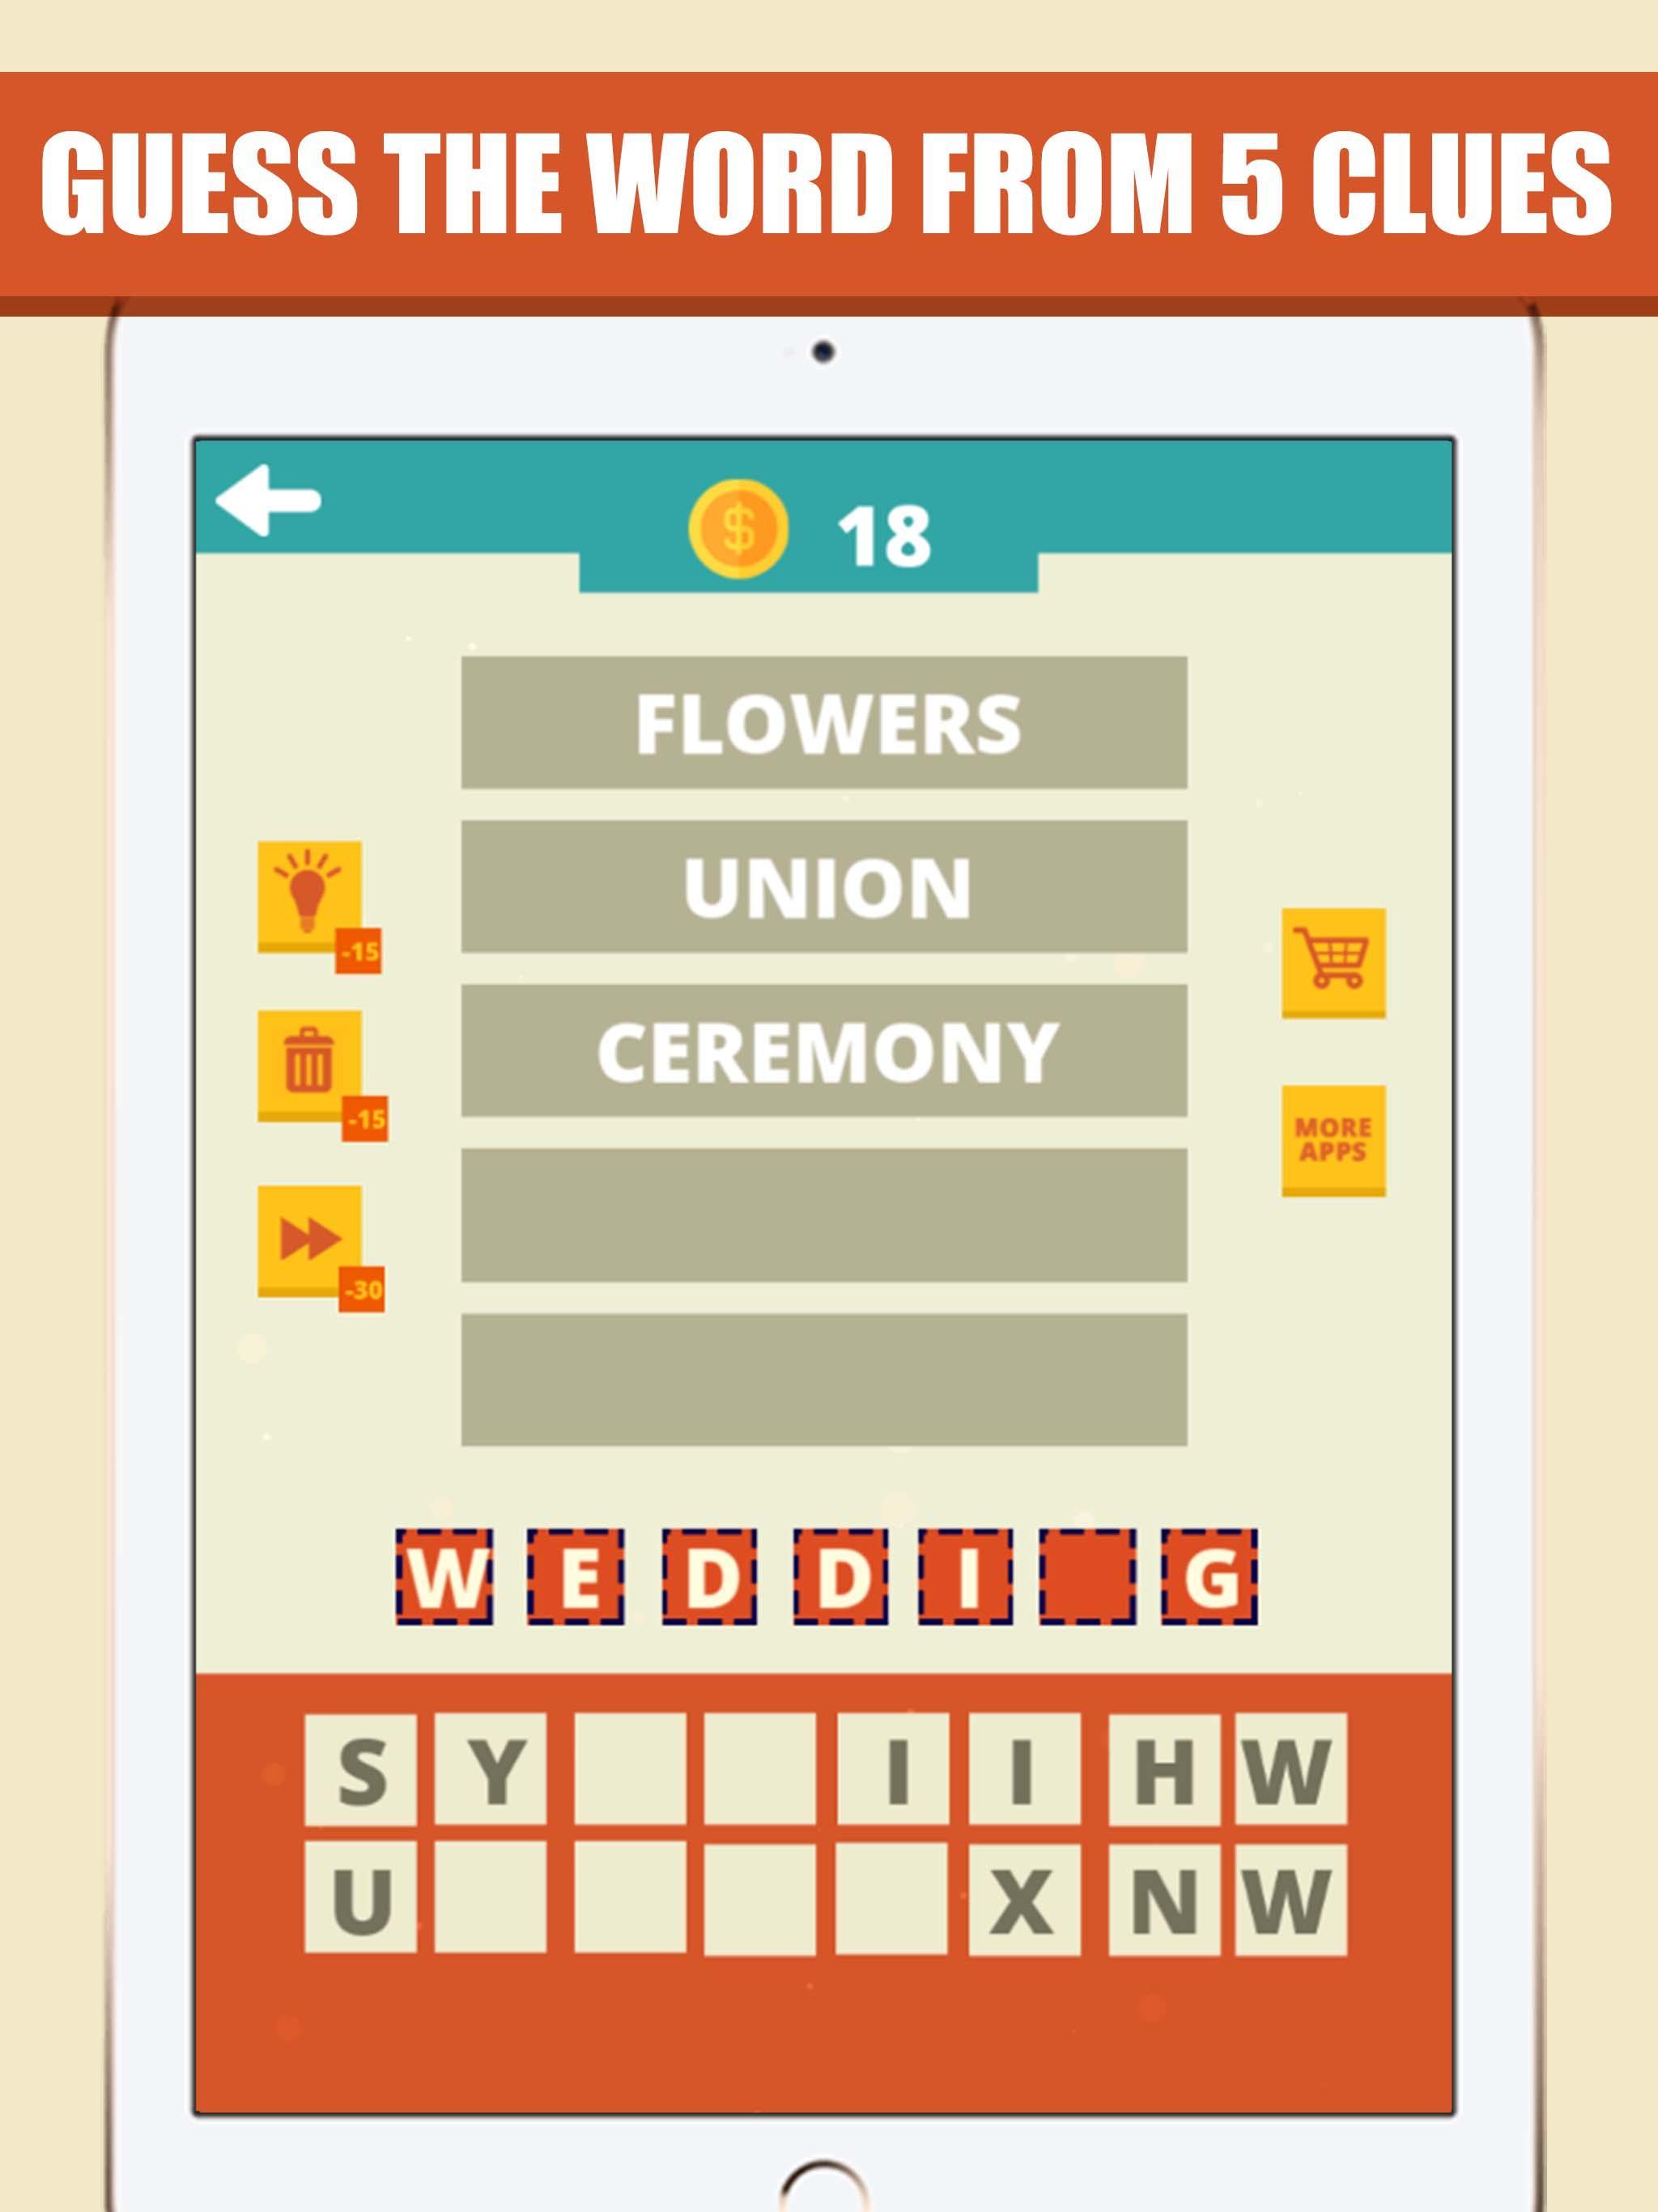 Guess The Word - 5 Clues 1 Word Quiz for Android - APK Download